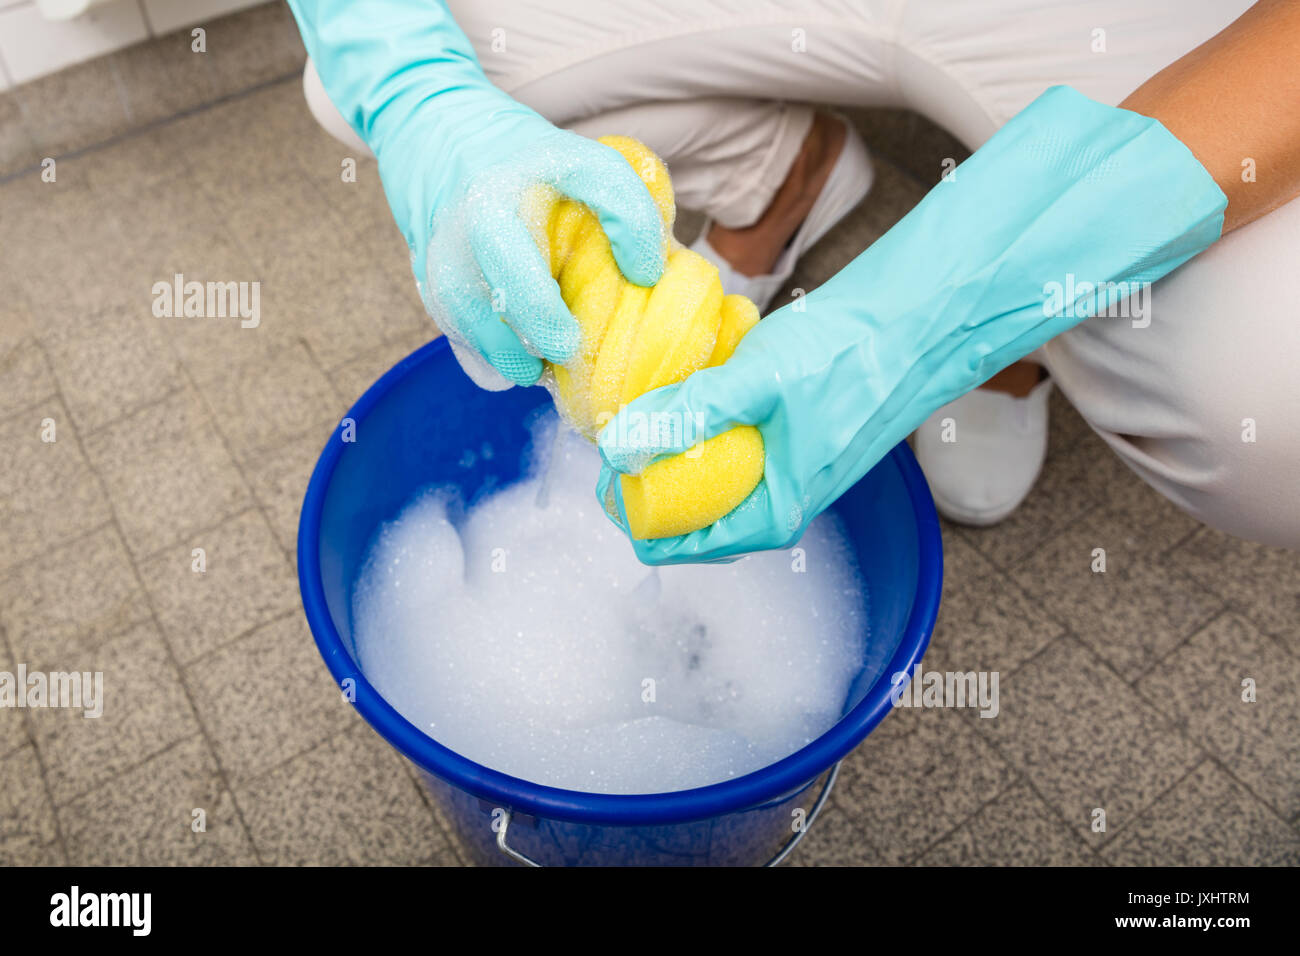 Bucket full of soap suds and hand washing Stock Photo - Alamy